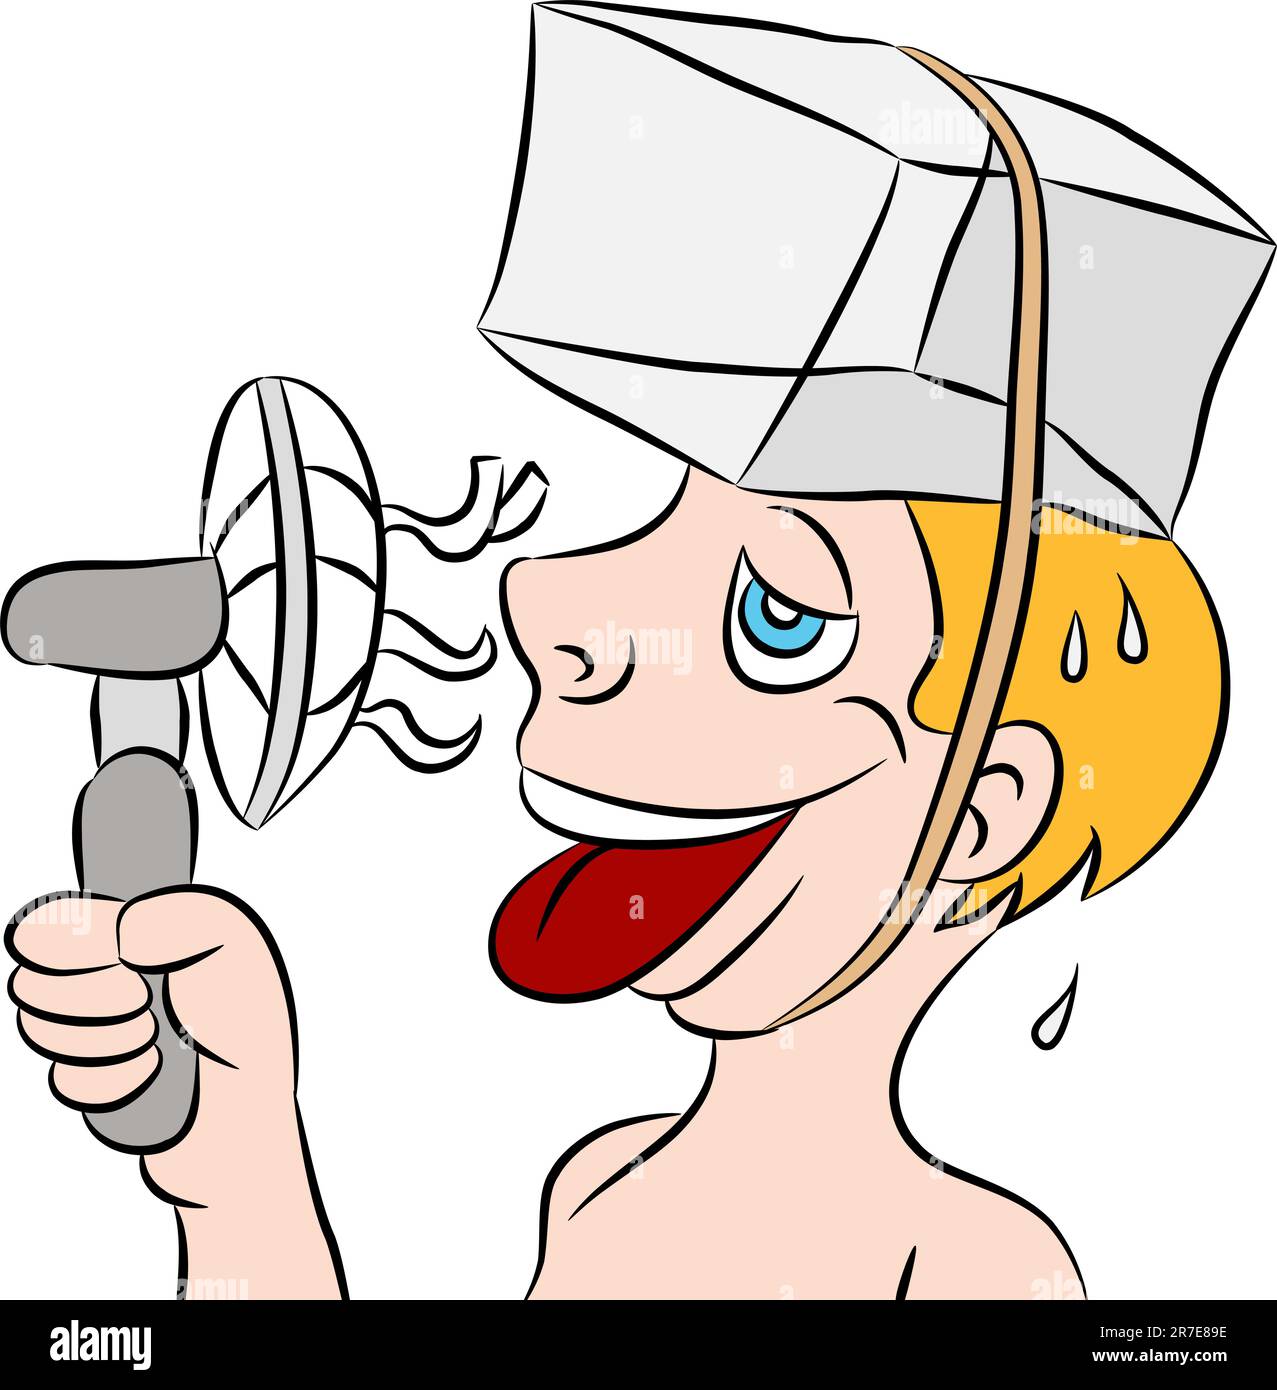 An image of a hot sweaty man trying to stay cool. Stock Vector